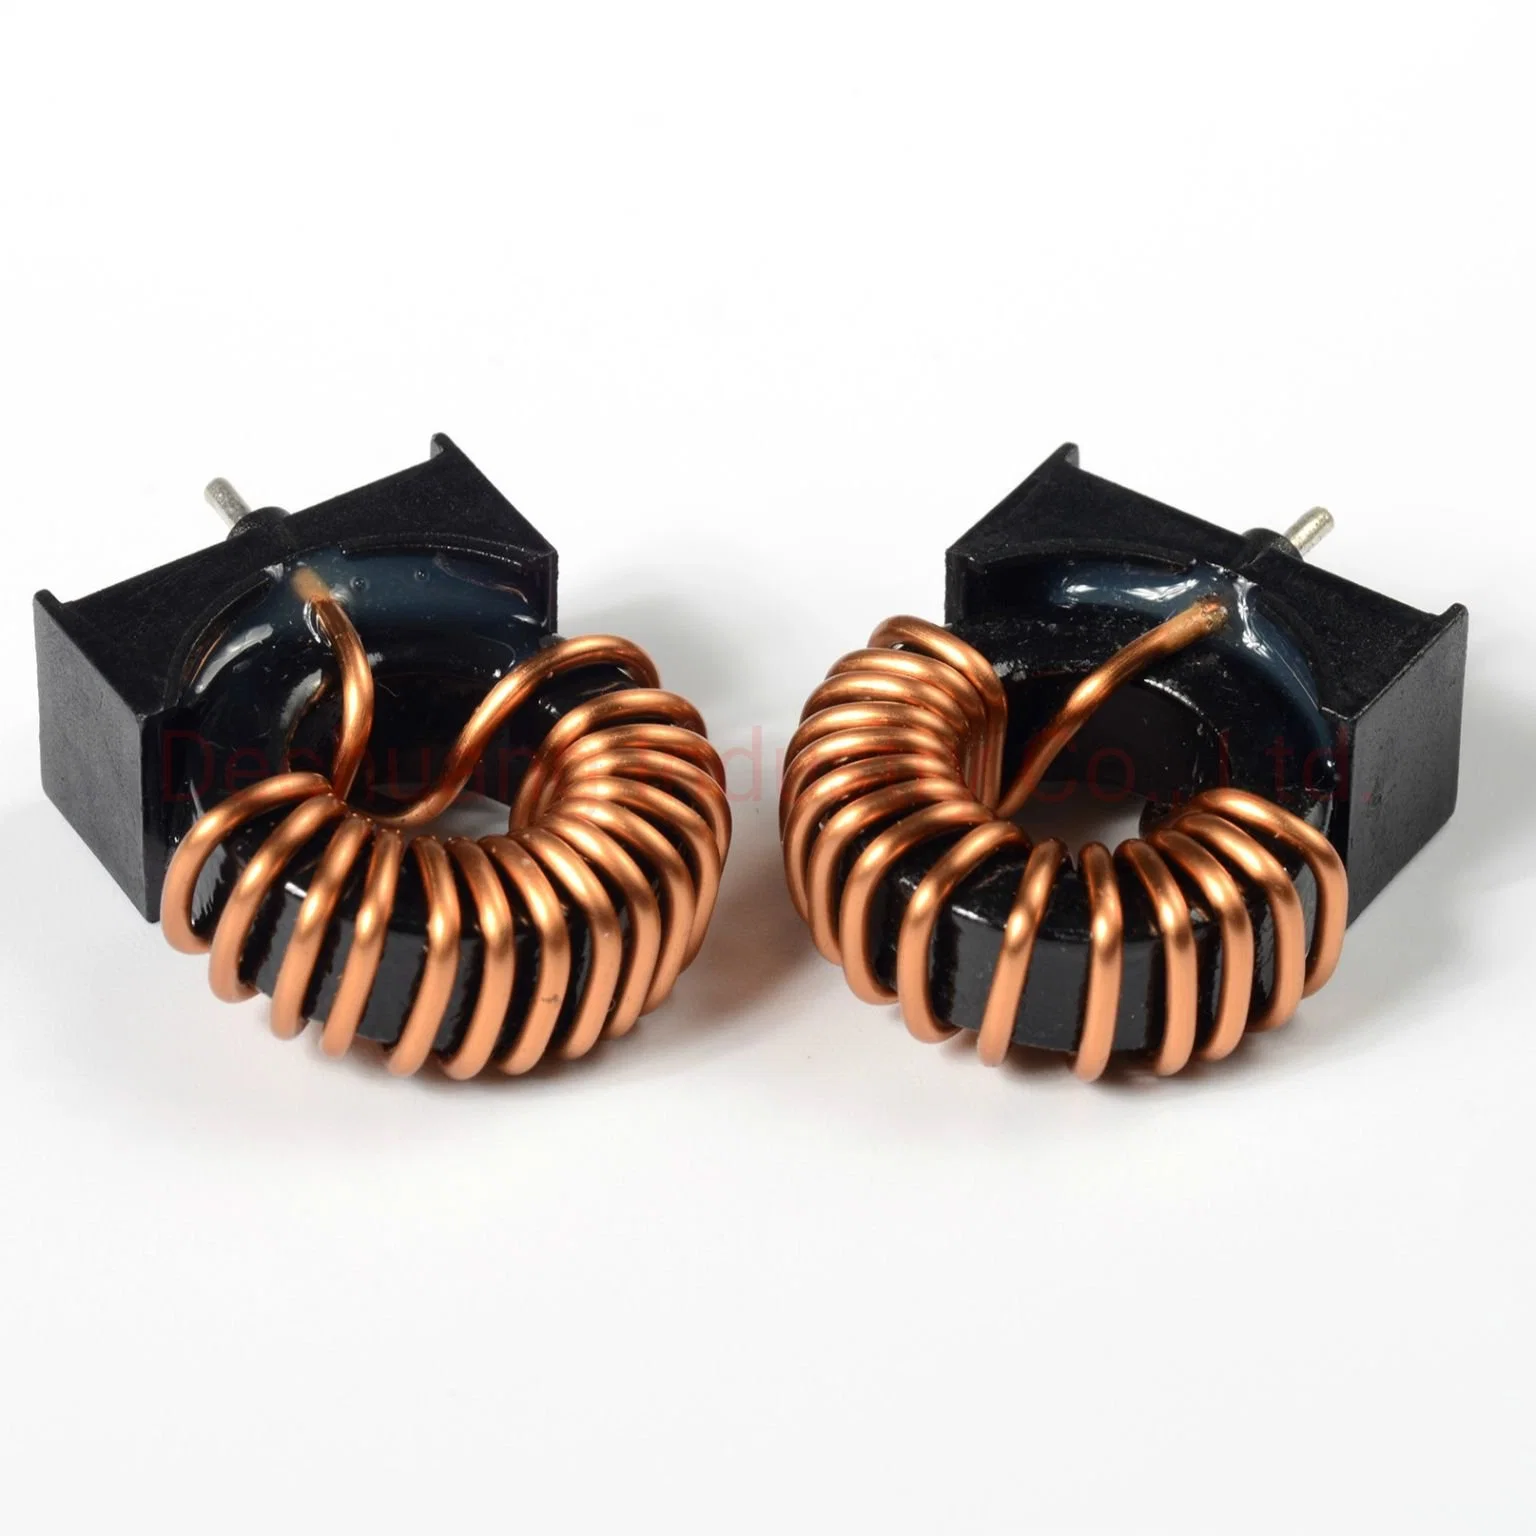 China High Quality High Current Toroidal Core Inductor 20mh 25mh 30mh 50mh Common Mode Line Chokes Copper Coil with Base for PCBA Switching Power Supplies